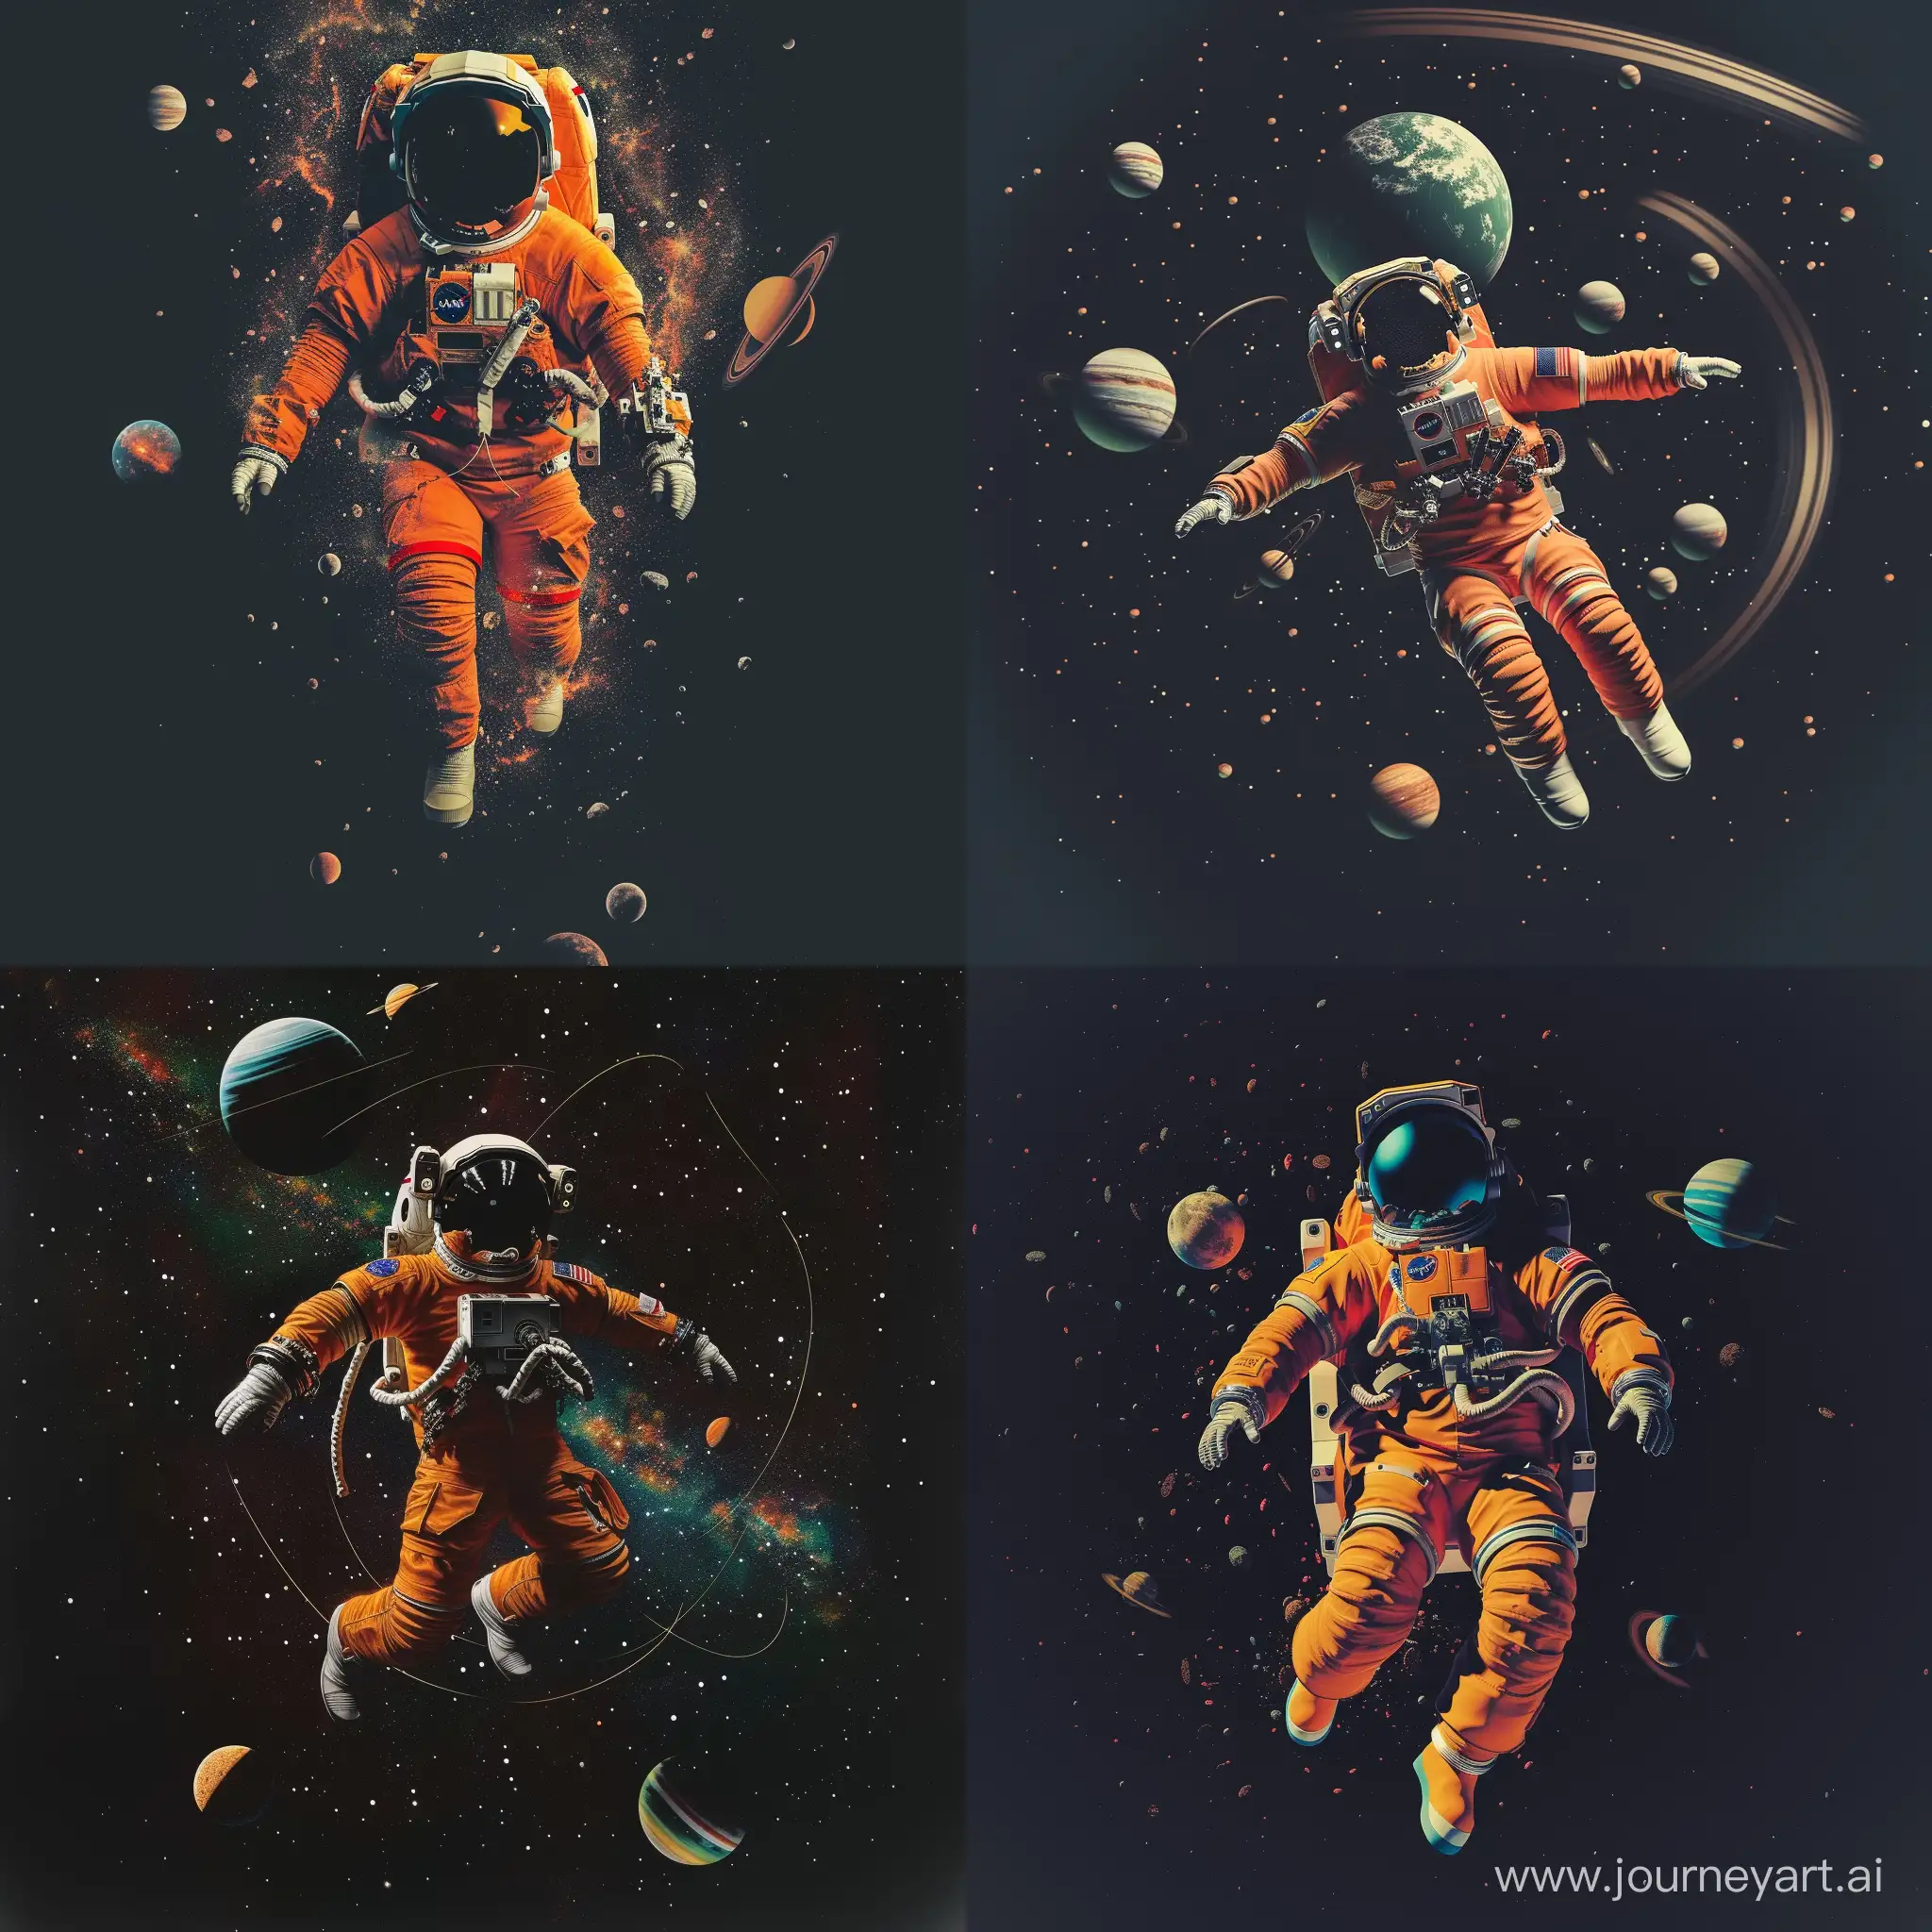 an astronaut in an orange spacesuit flies in space, orbits with planets revolve around him